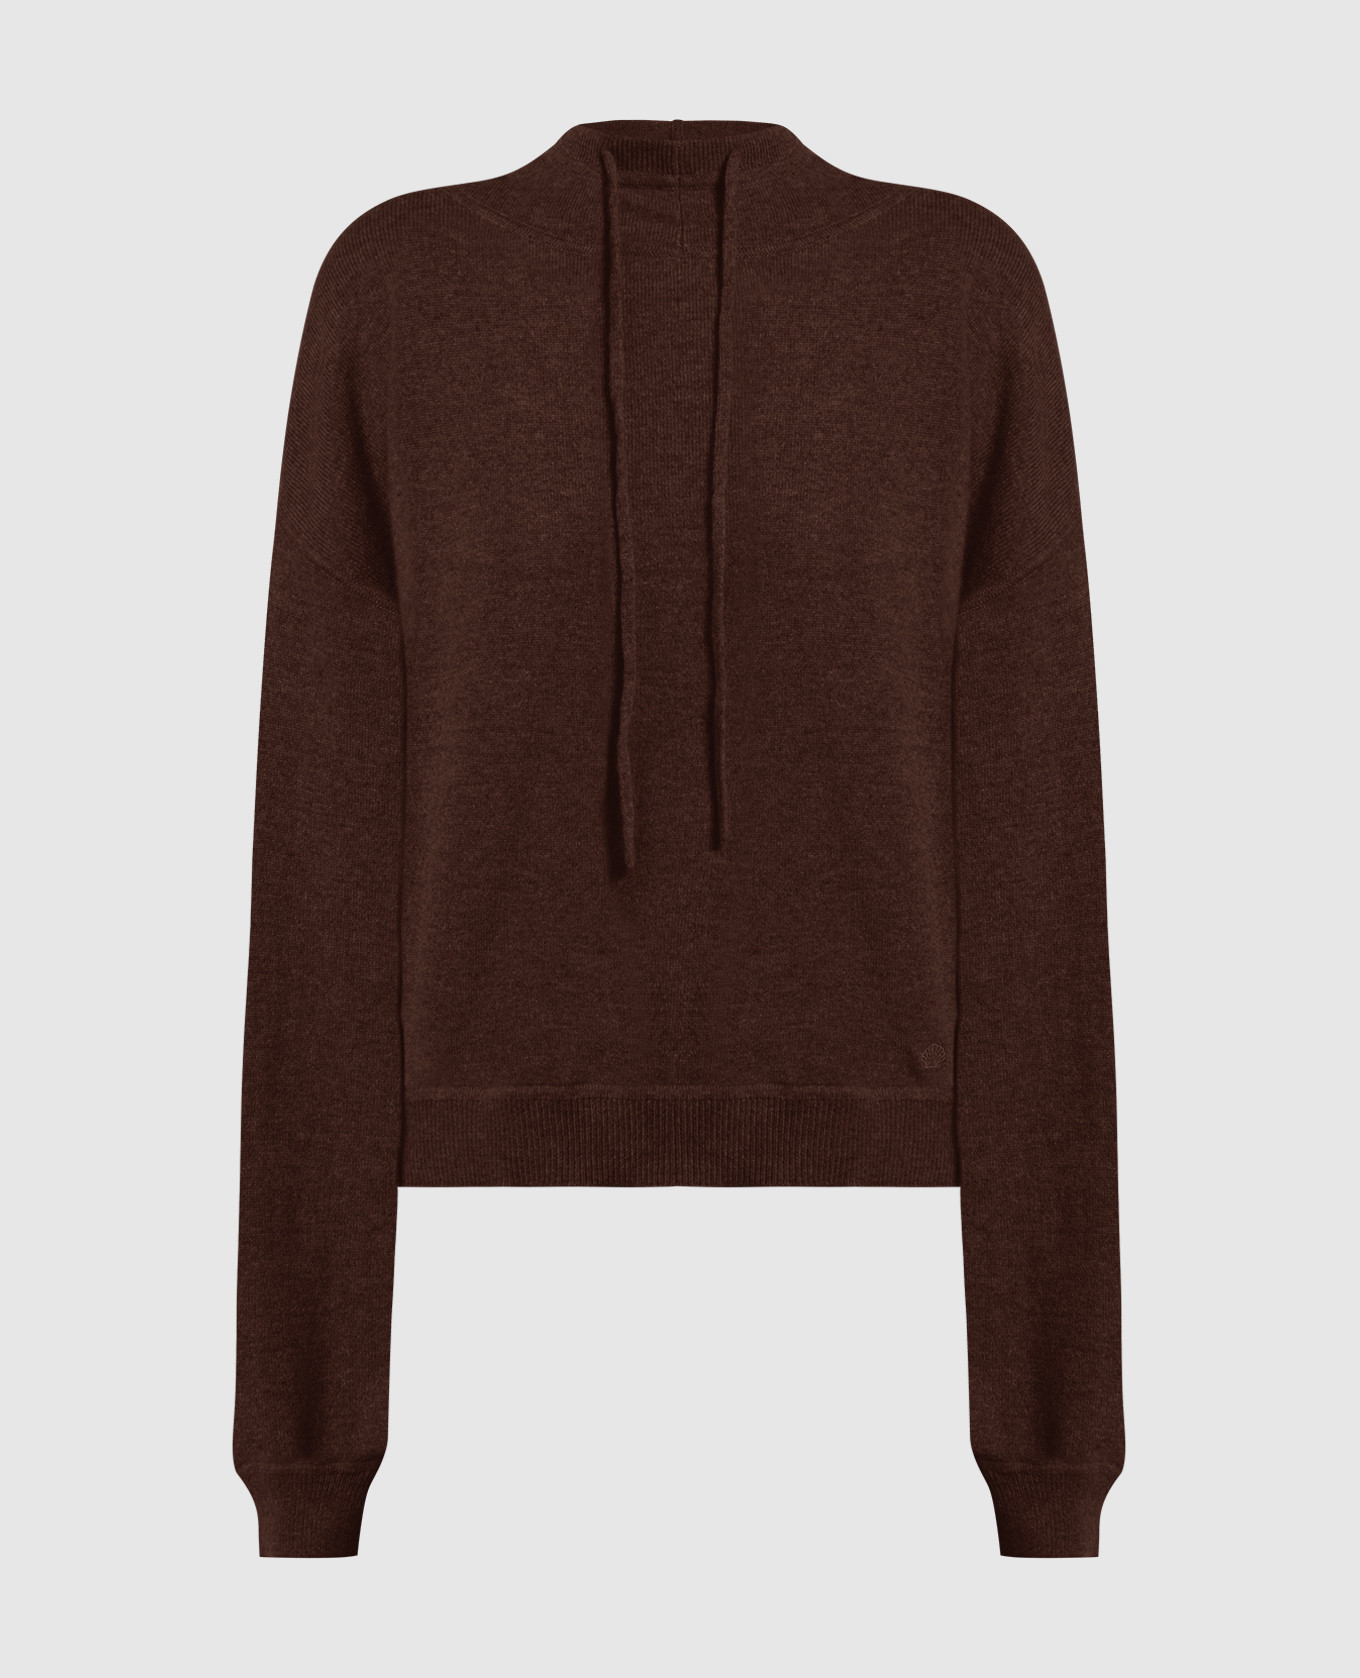 Brown cashmere hoodie